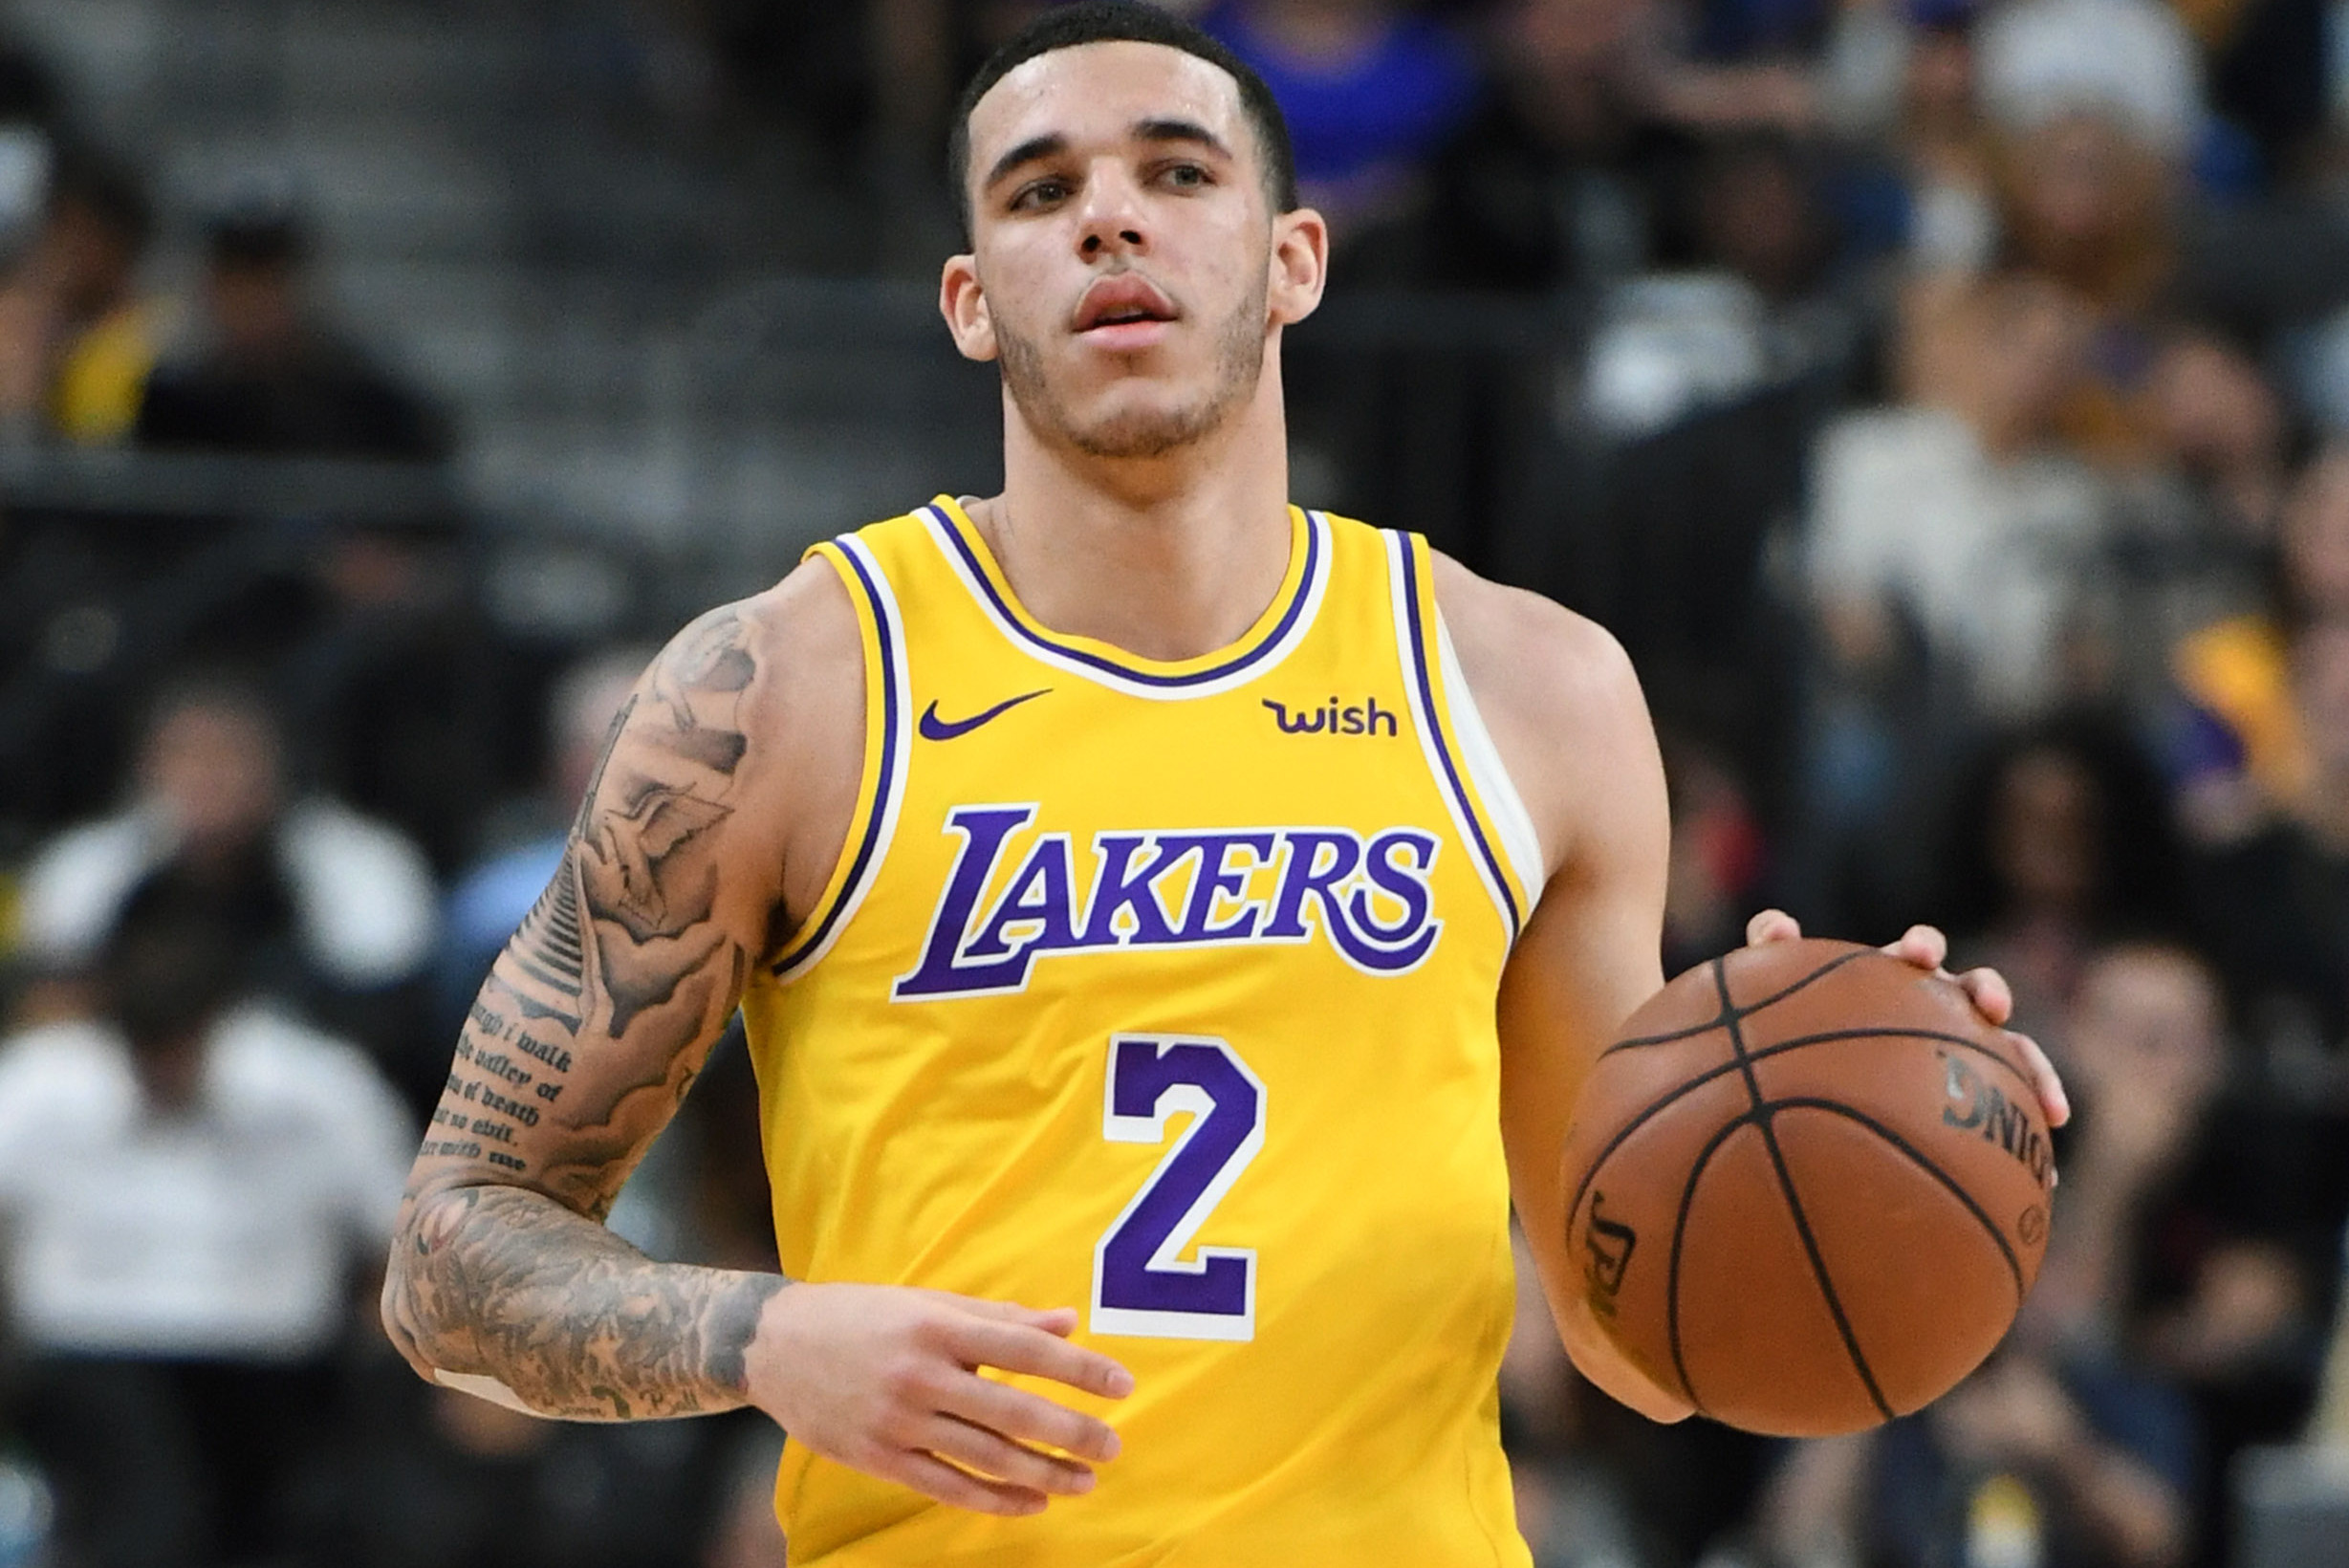 Lakers reached out to Lonzo Ball wondering if Big Baller Brand